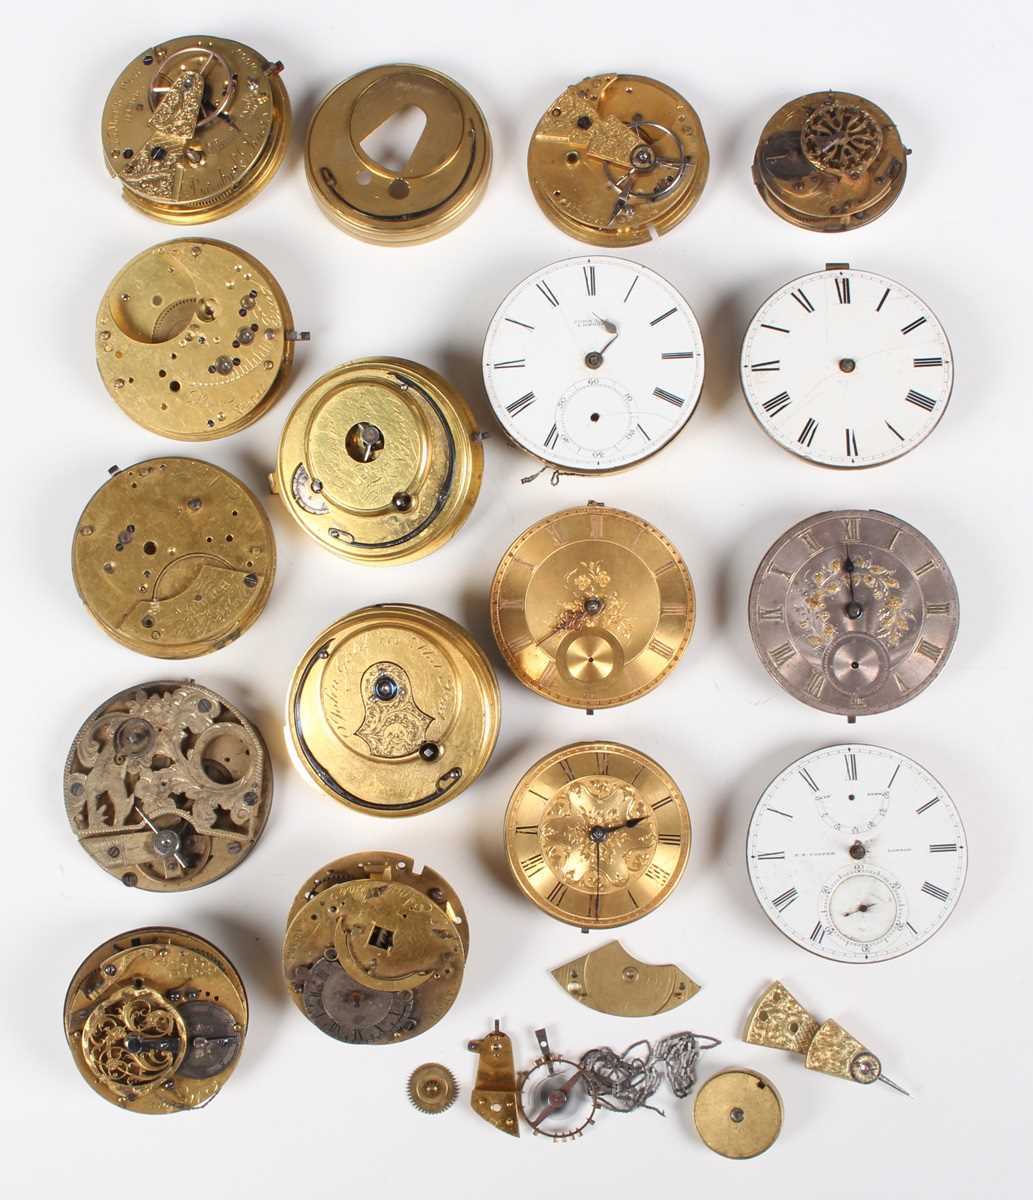 Three 18th century French gilt fusee pocket watch movements, each signed, including 'Michau a Paris'